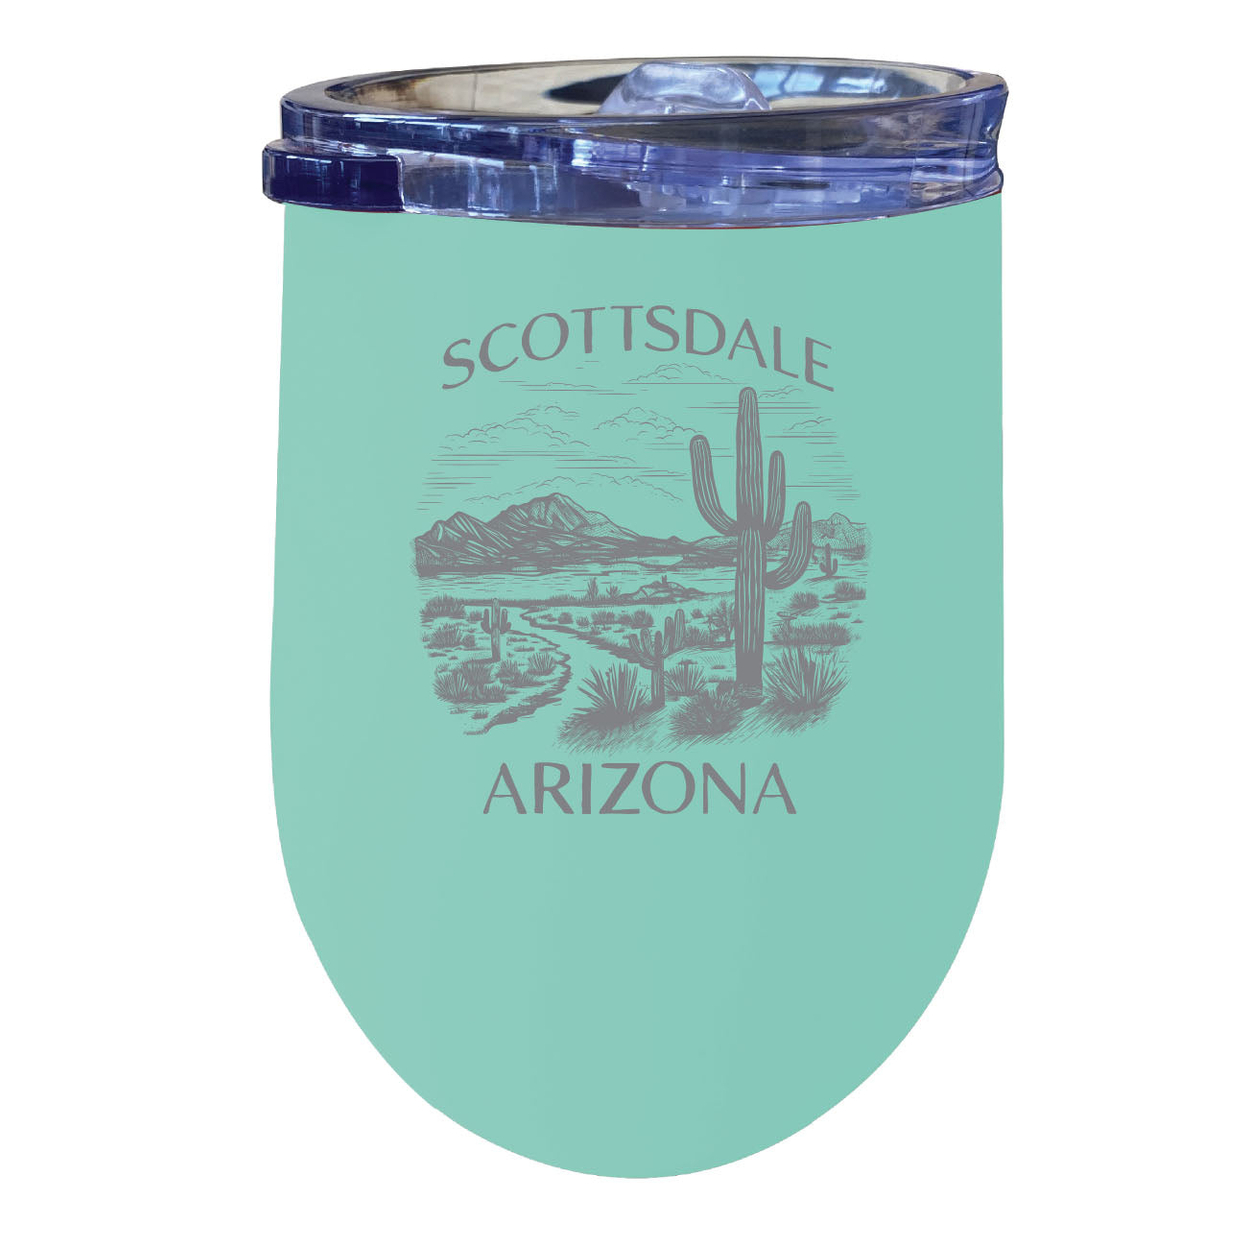 Scottsdale Arizona Souvenir 12 Oz Engraved Insulated Wine Stainless Steel Tumbler - Navy,,4-Pack